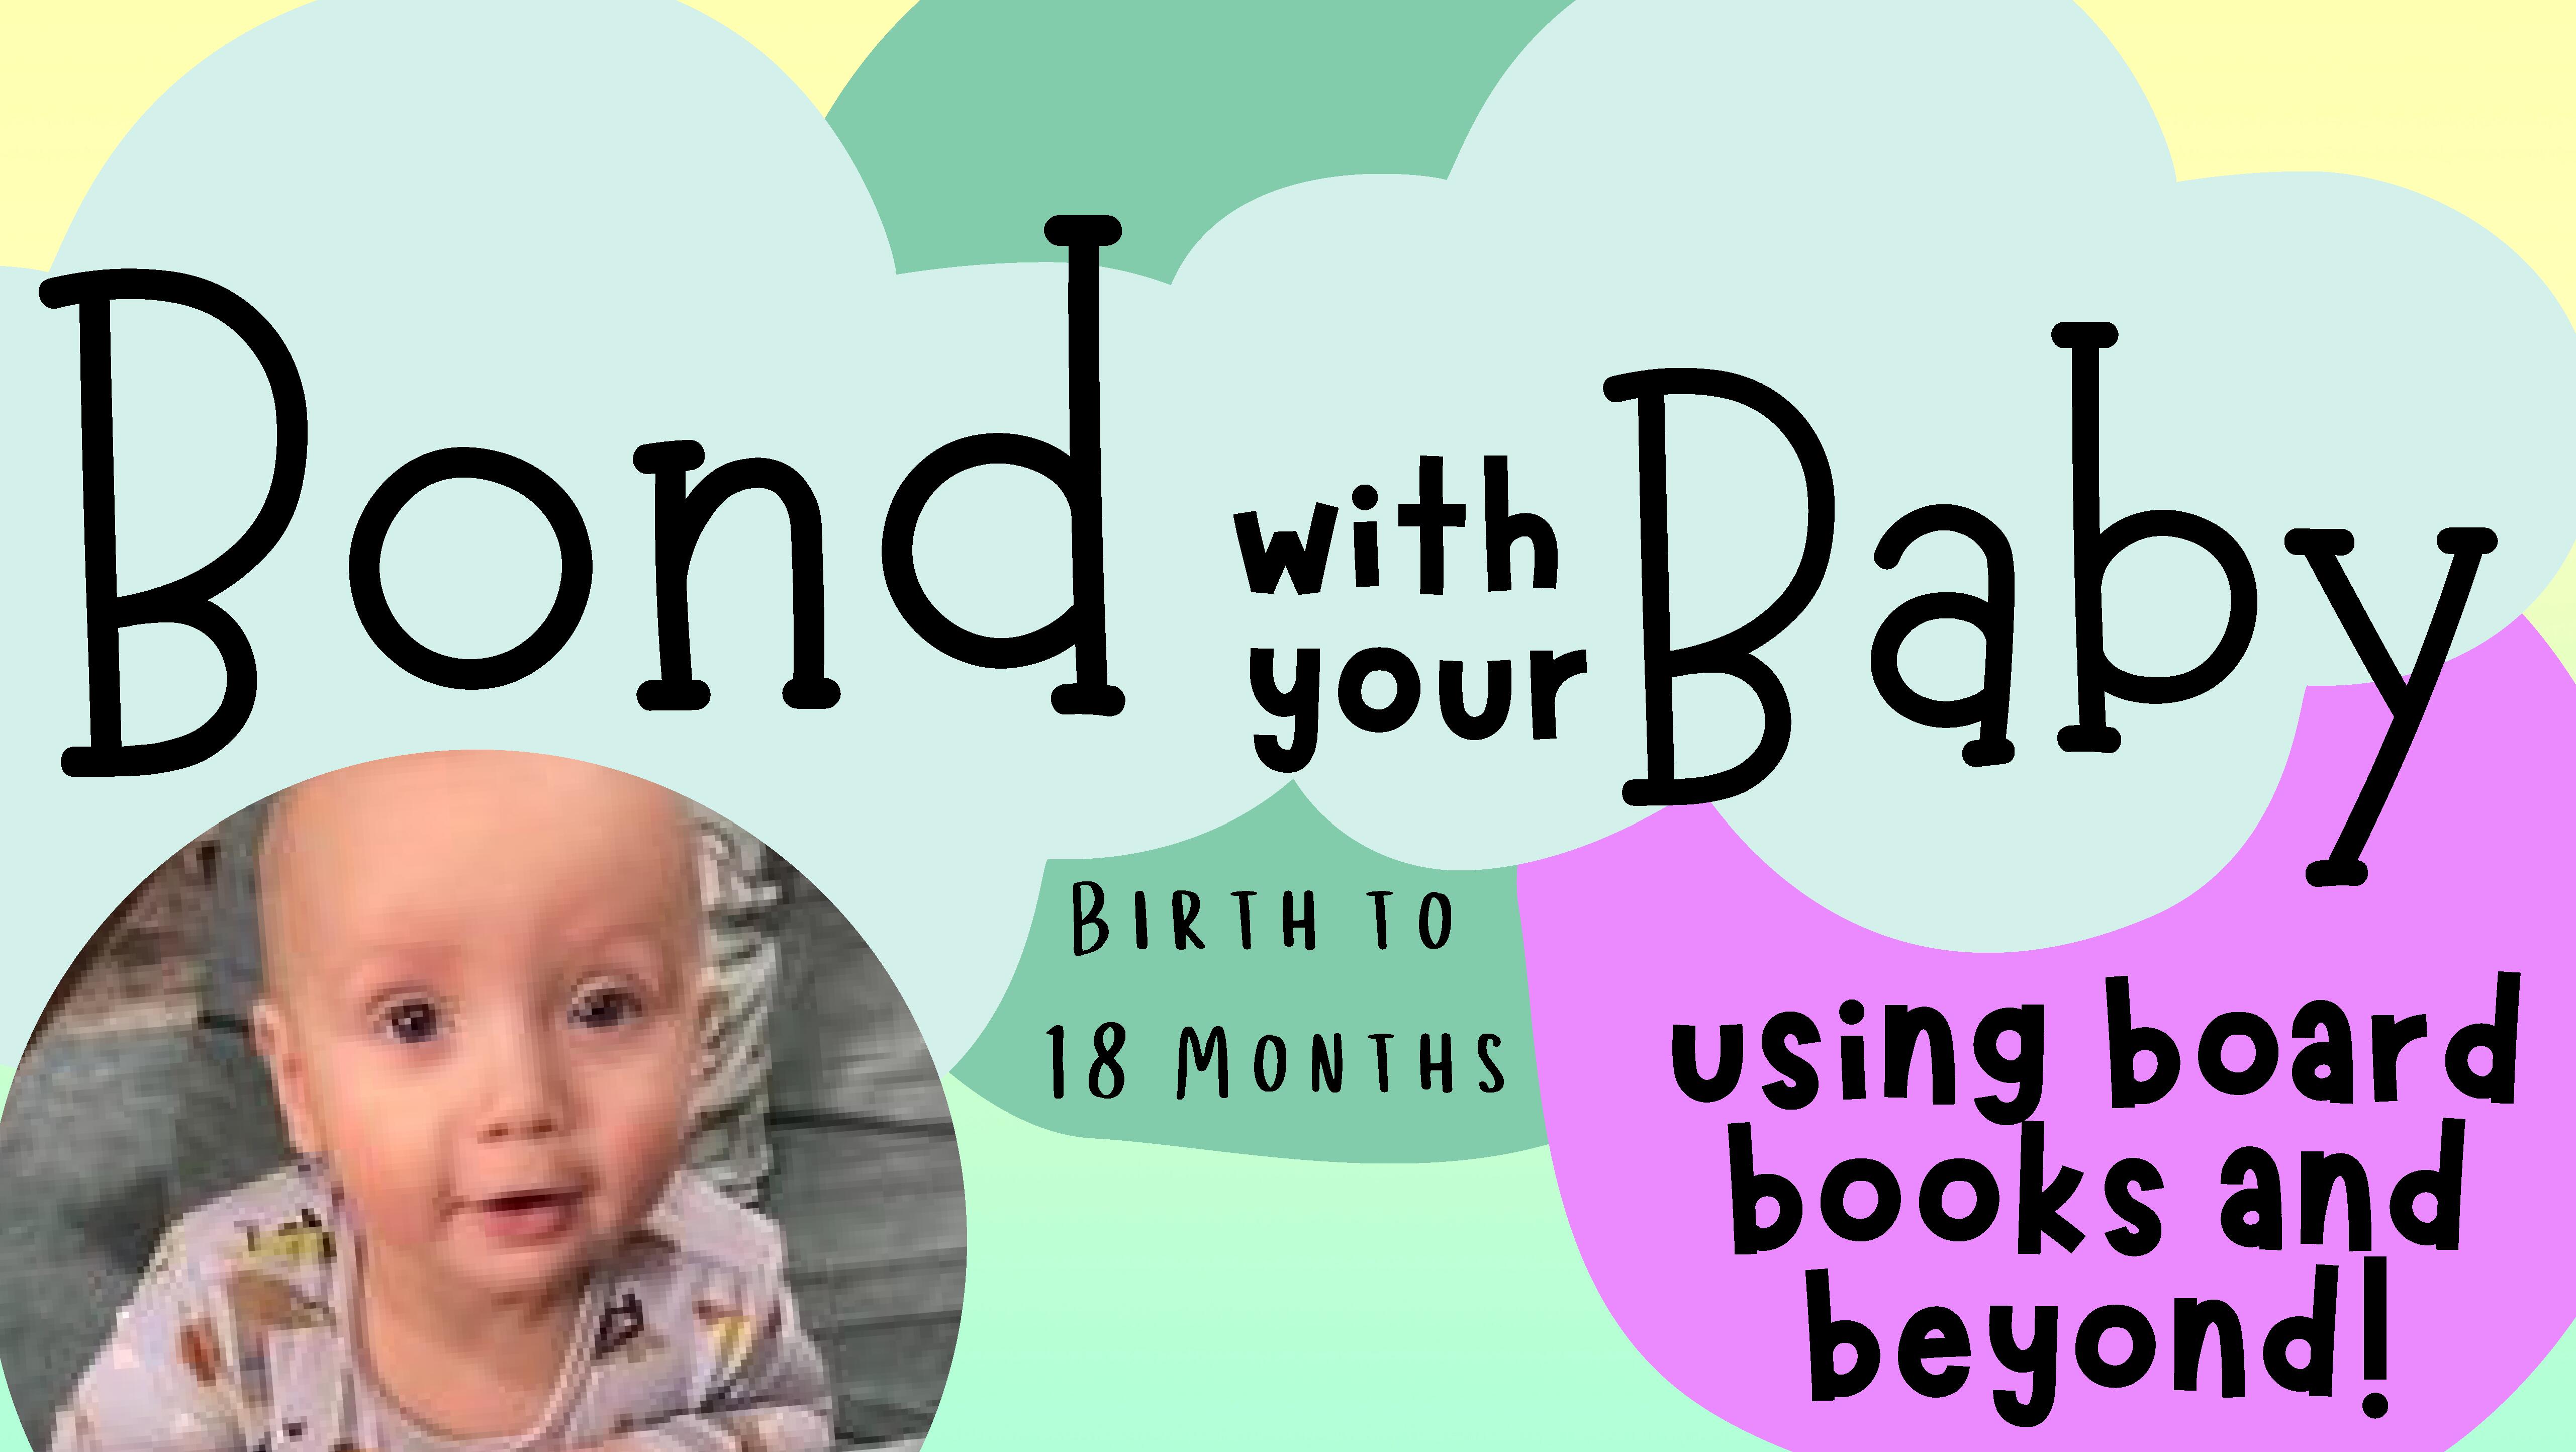 Bond with your baby using board books and beyond - birth to 18 months